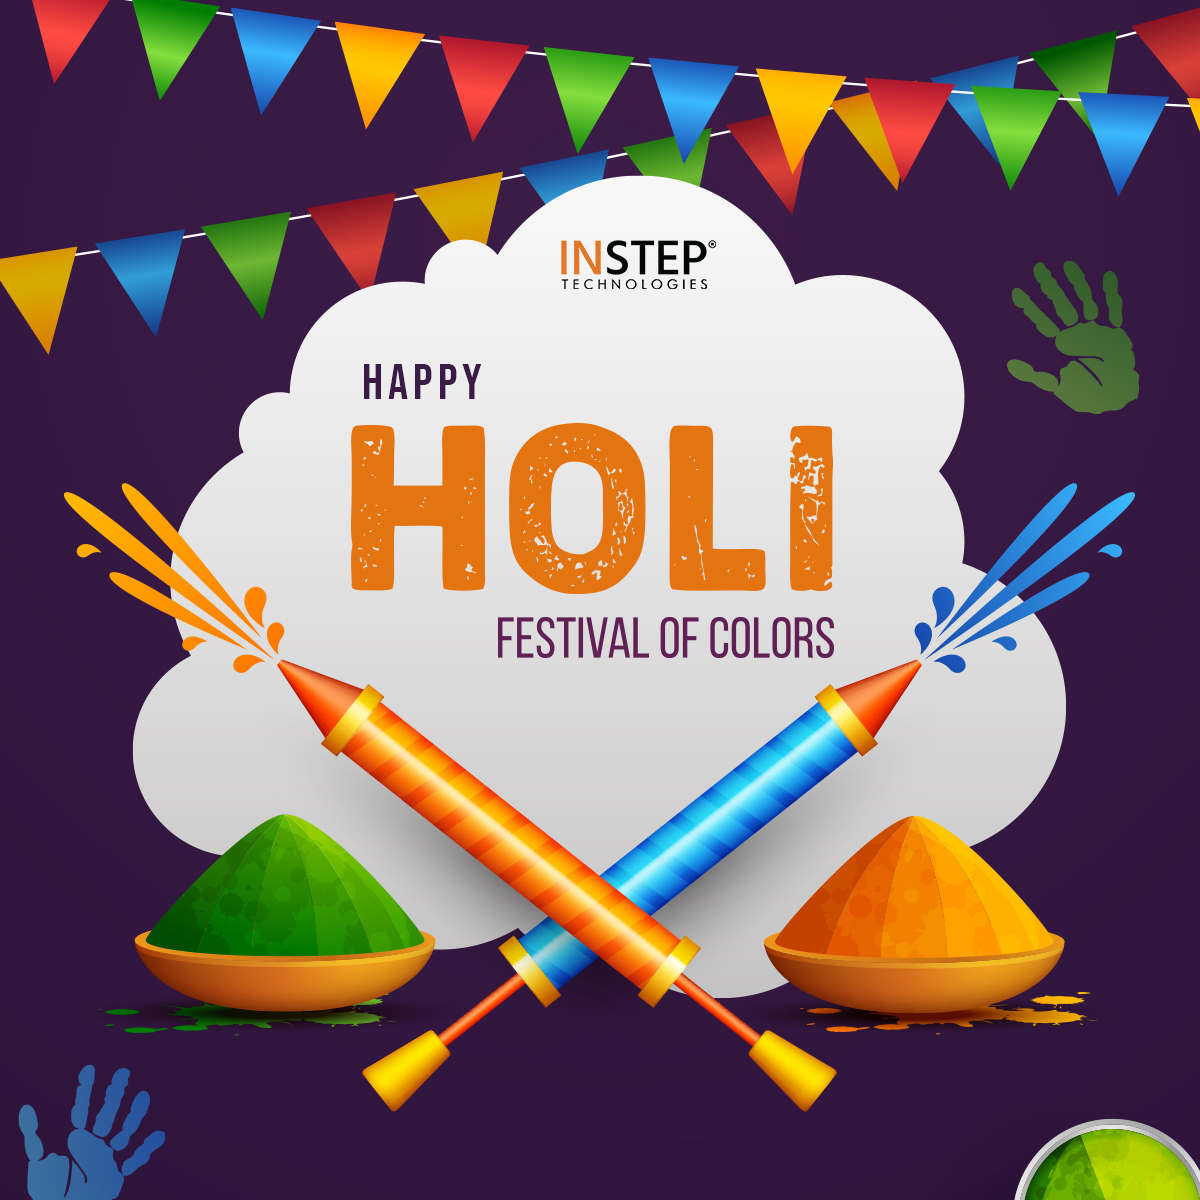 Wishing you and your family a Holi bash full of giggles, splashes of vibrant colors, and tons of happiness sprinkled! 𝐌𝐚𝐲 𝐲𝐨𝐮𝐫 𝐥𝐢𝐟𝐞 𝐛𝐞 𝐚𝐬 𝐜𝐨𝐥𝐨𝐫𝐟𝐮𝐥 𝐚𝐬 𝐭𝐡𝐞 𝐡𝐮𝐞𝐬 𝐨𝐟 𝐇𝐨𝐥𝐢.

𝐇𝐚𝐩𝐩𝐲 𝐇𝐨𝐥𝐢 𝐜𝐞𝐥𝐞𝐛𝐫𝐚𝐭𝐢𝐨𝐧𝐬!

#HappyHoli2024 #FestiveFun